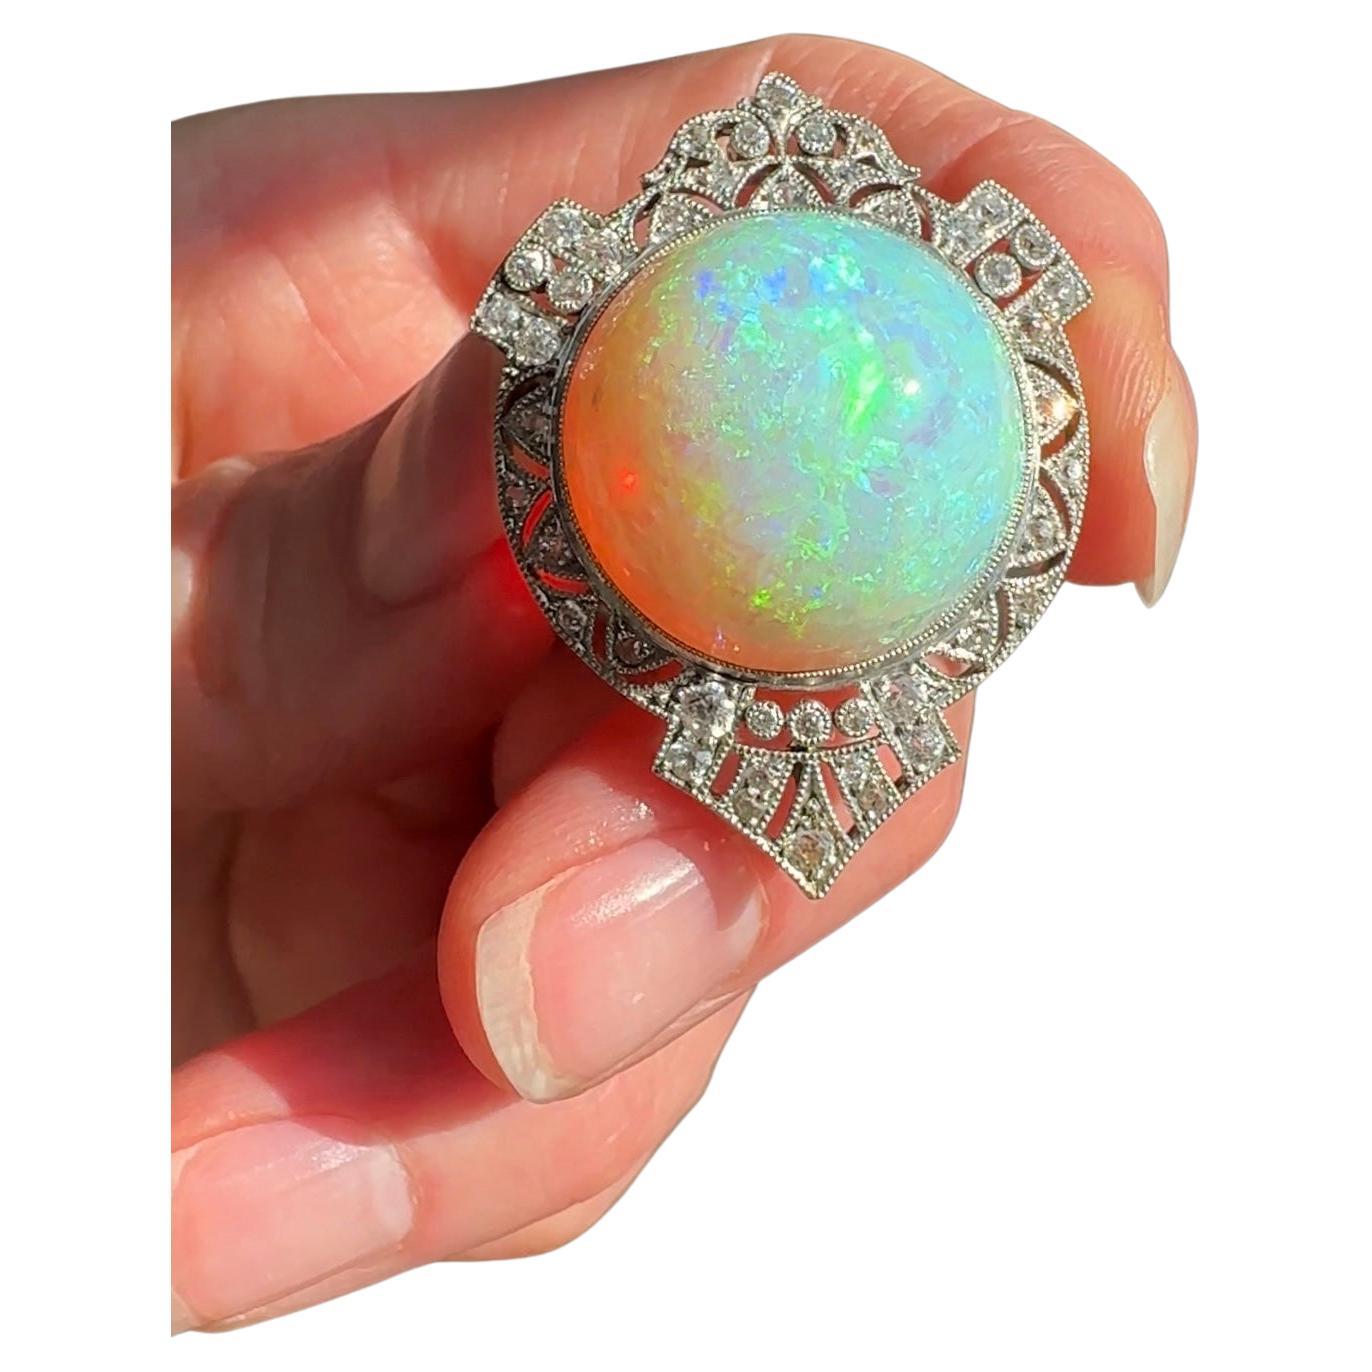 Dating to the first or second decade of the twentieth century, this delightful pendant brooch by Black, Starr and Frost centers on a magical 25 carat opal gumball filled with a dazzling array of colors. Flecks of neon green, lilac purple and